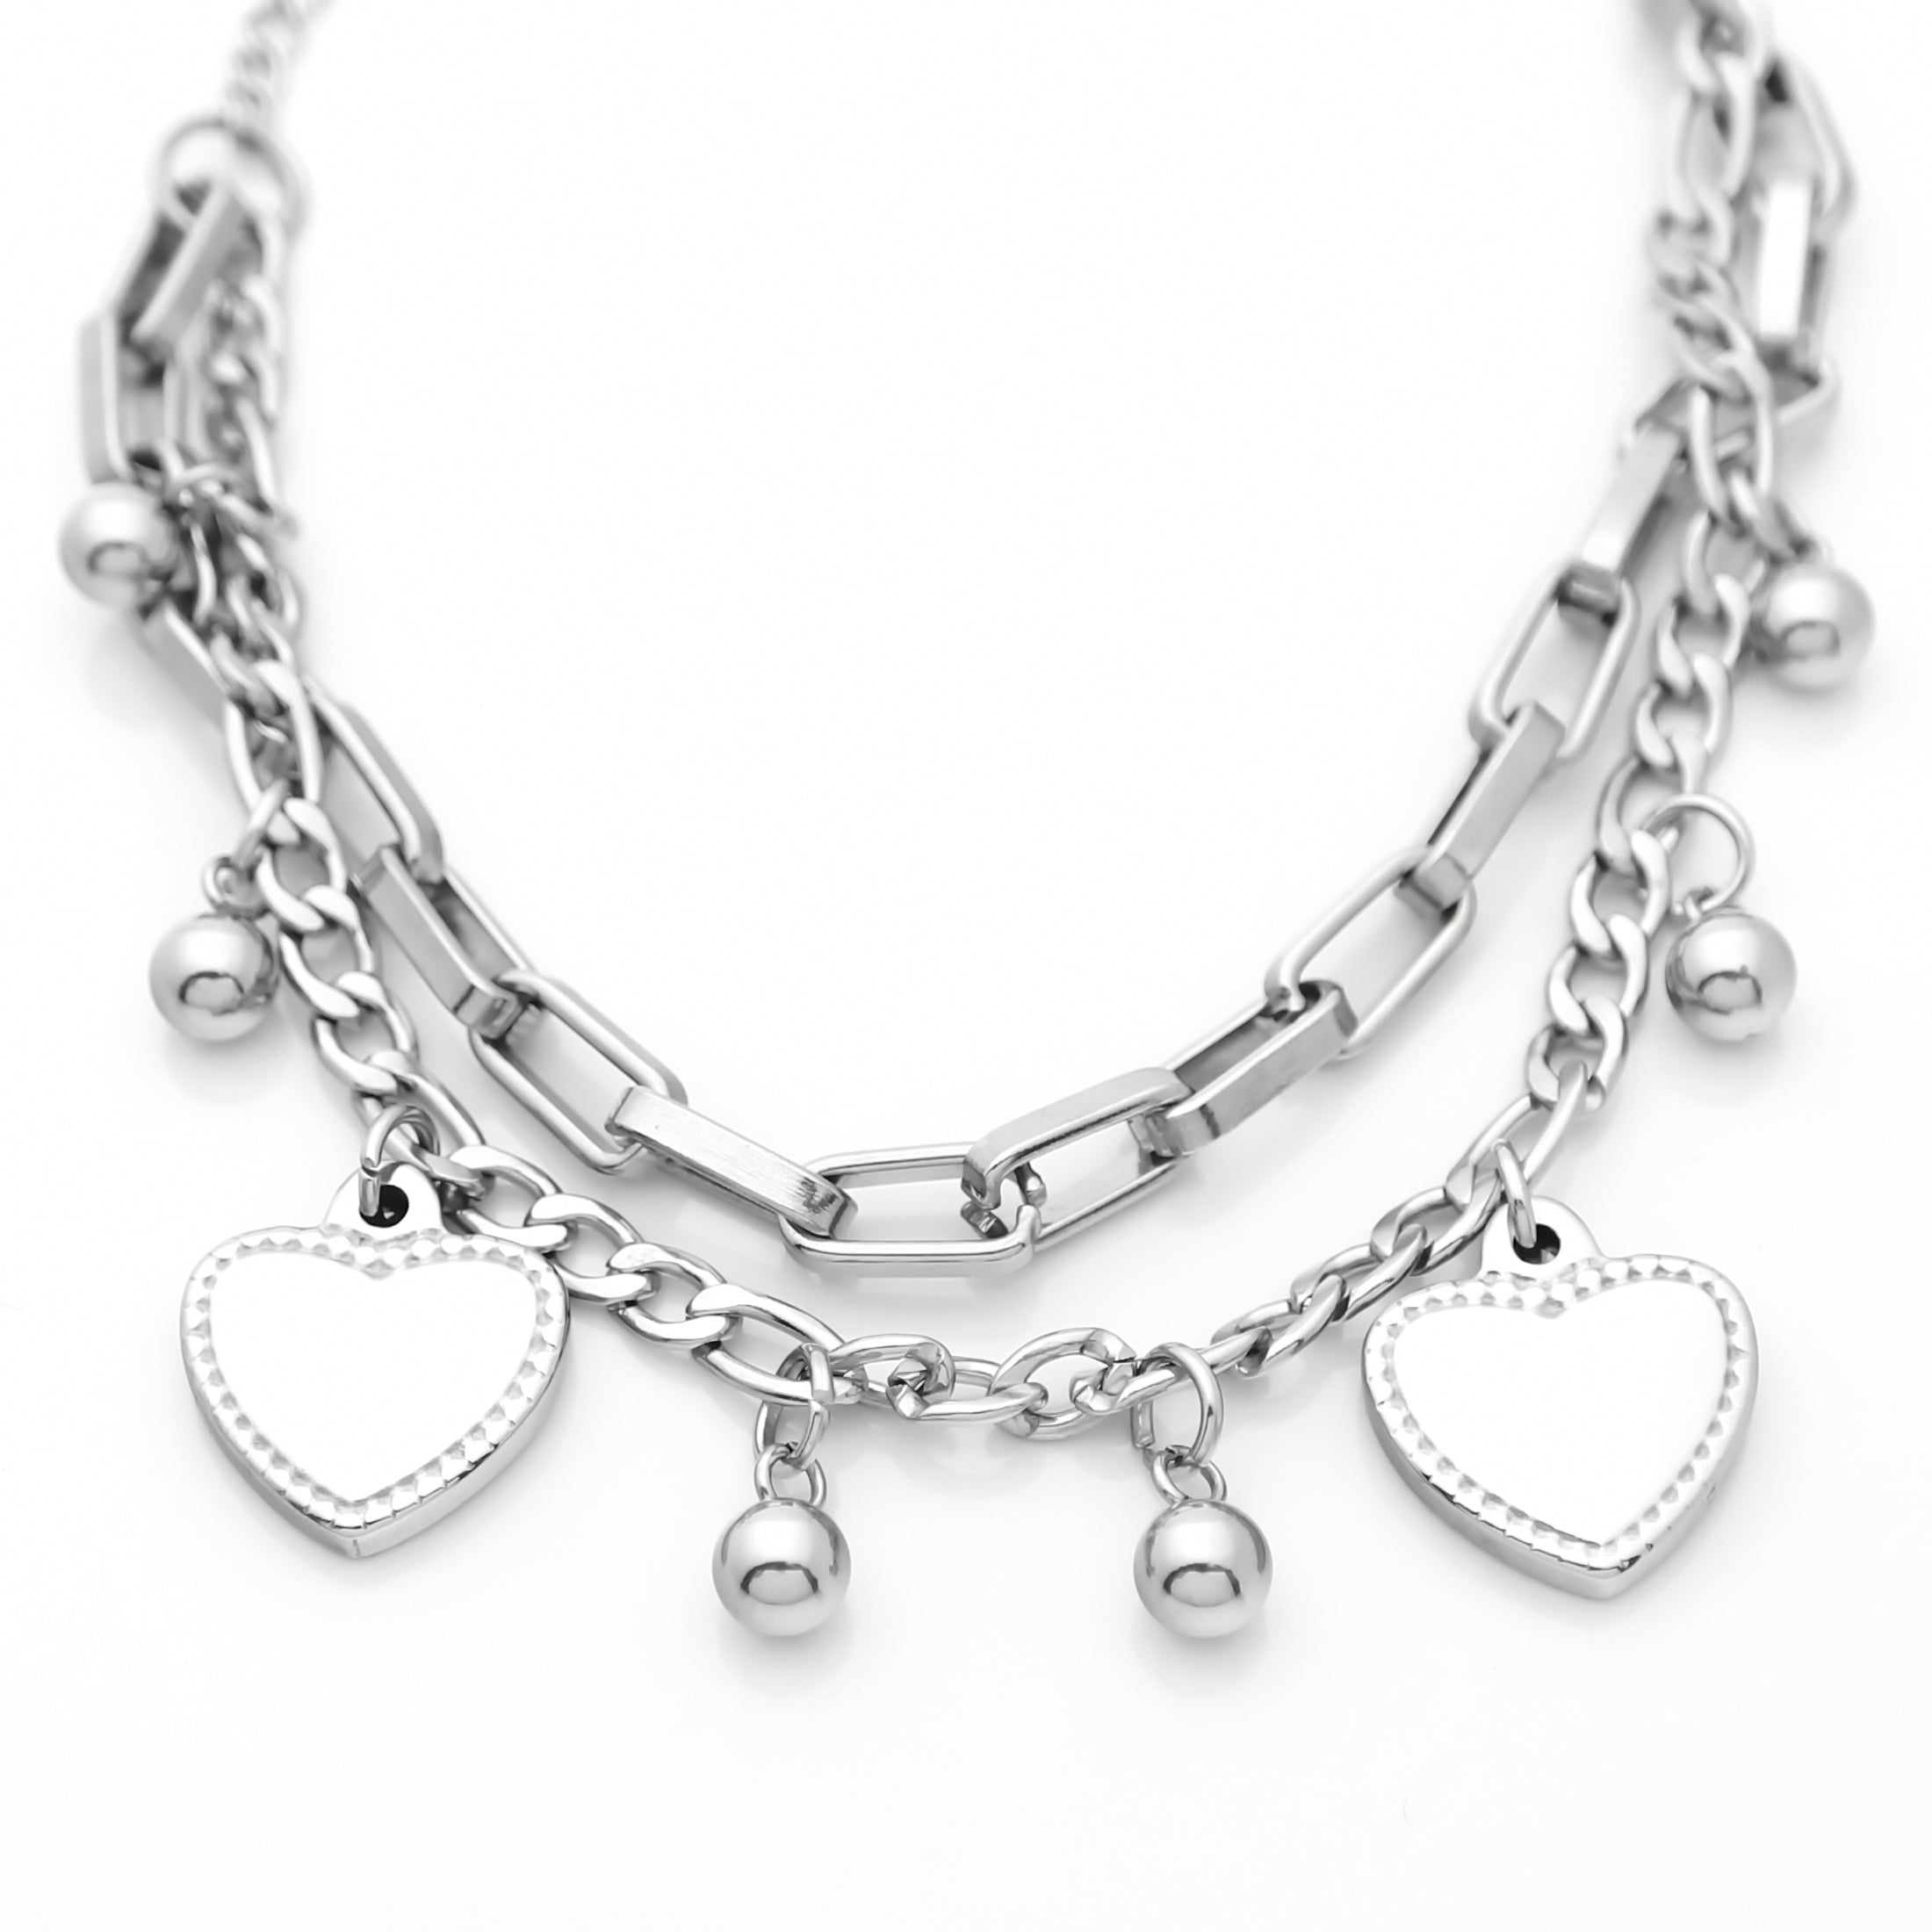 Double Layered Women's Bracelet with Dangle Heart Charms - Silver-Bracelets, Jewellery, Stainless Steel, Stainless Steel Bracelet, Women's Bracelet, Women's Jewellery-sb0074-s-2-Glitters